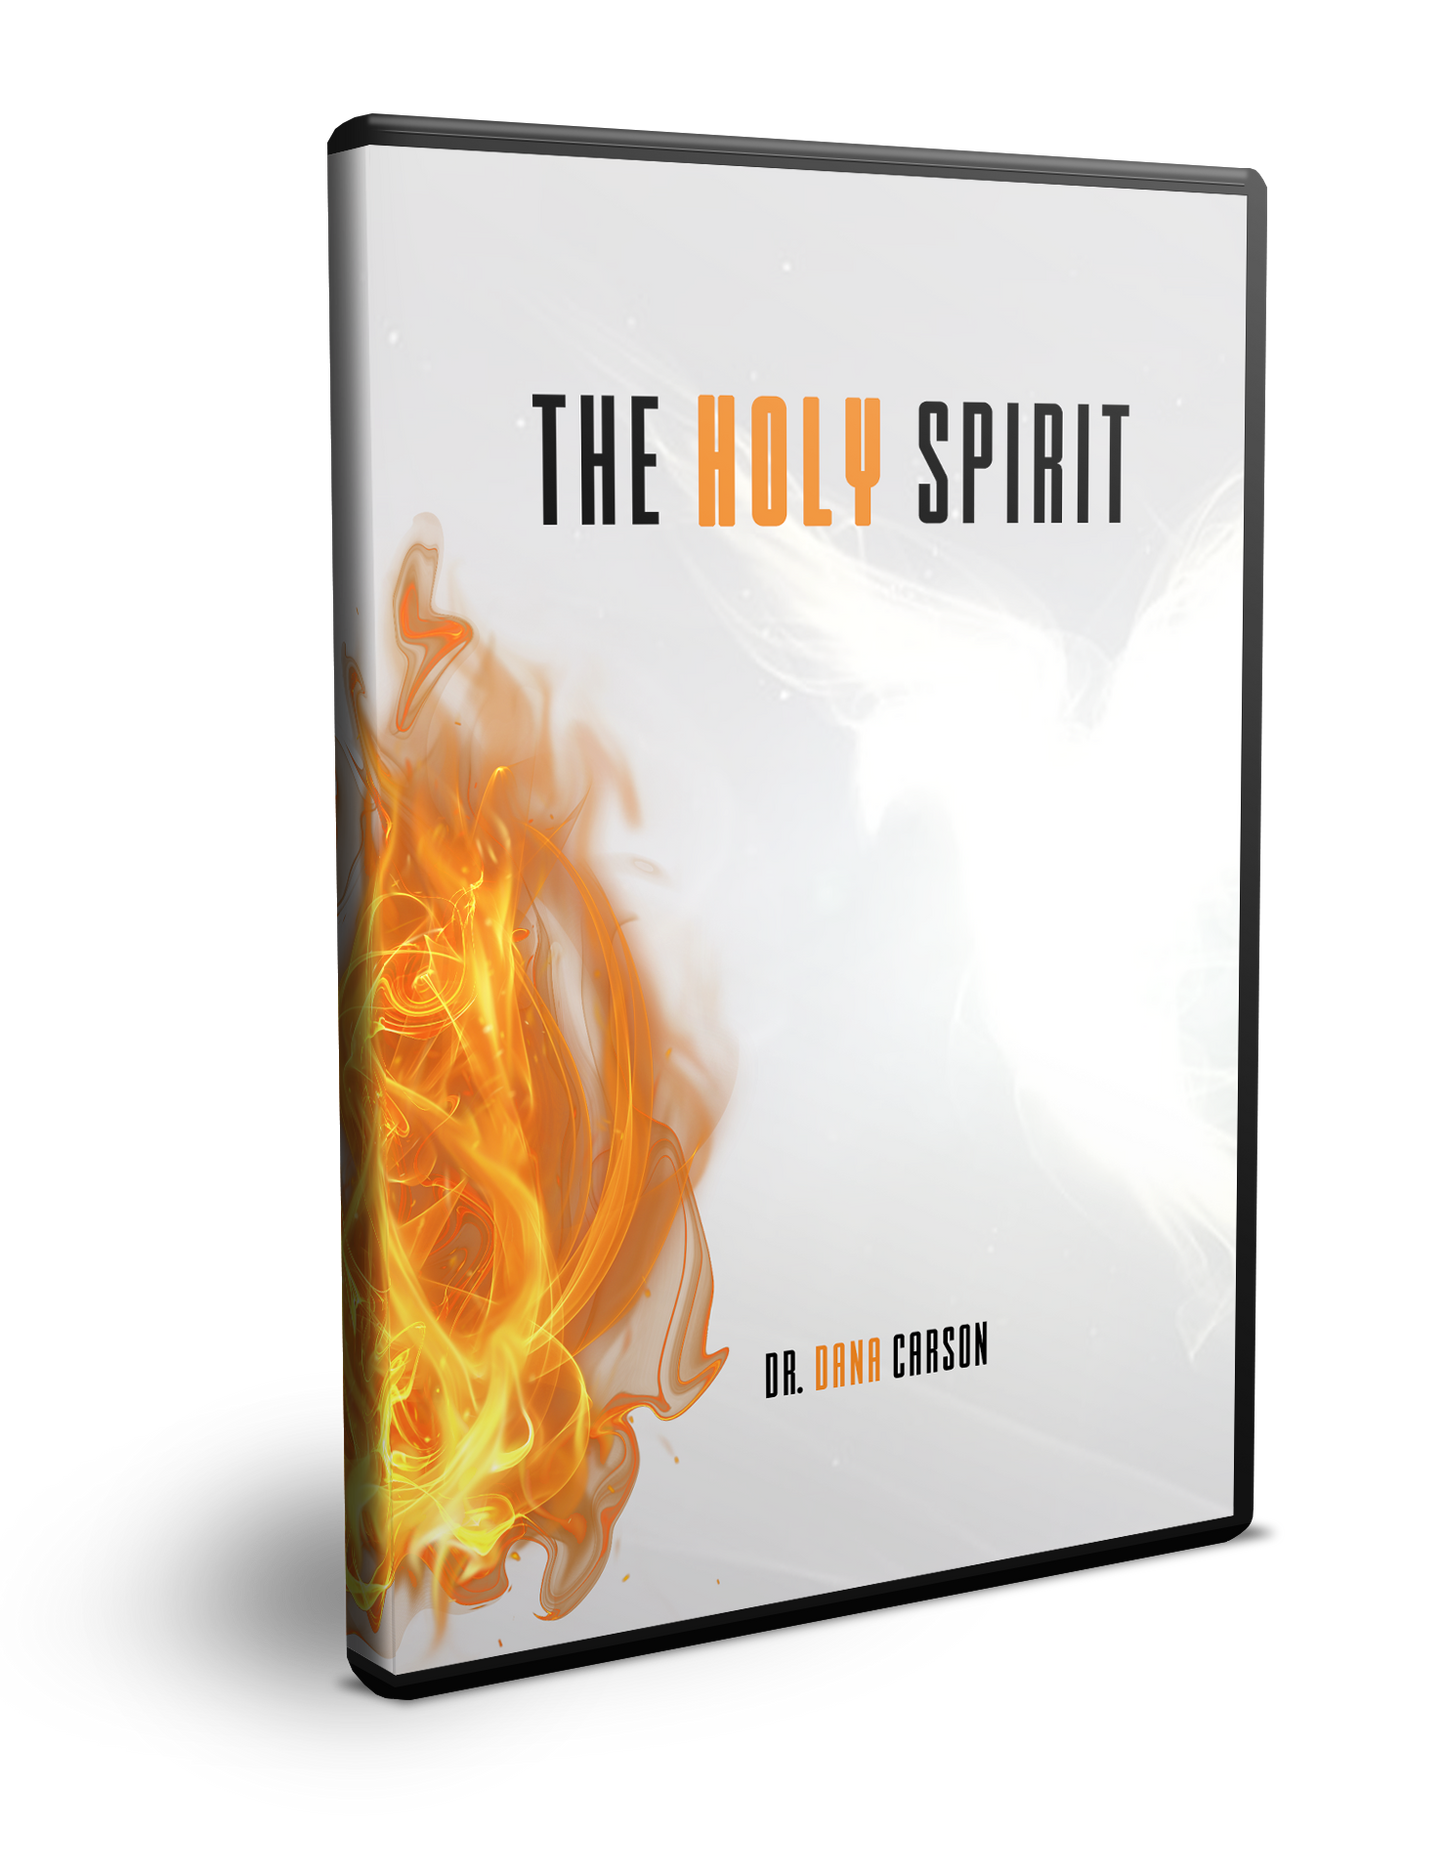 The Ministry of the Holy Spirit: Encountering the Holy Spirit